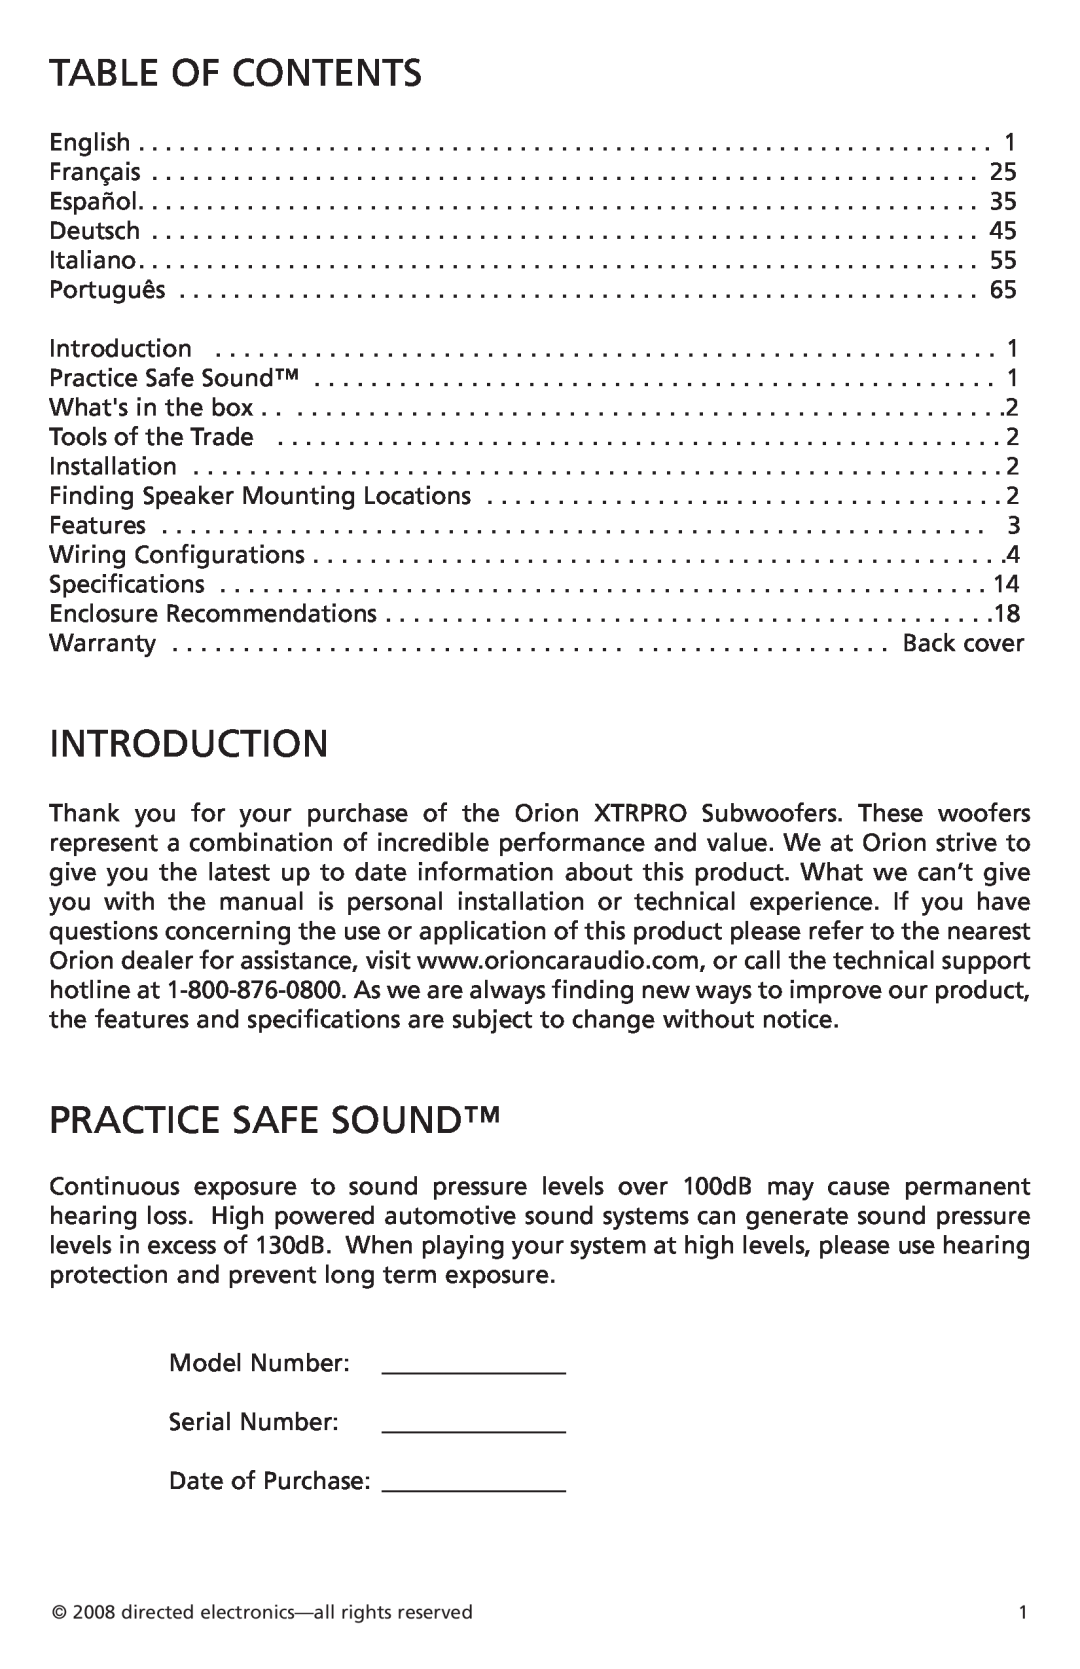 Orion Car Audio XTRPRO124, XTRPRO154, XTRPRO152, XTRPRO102, XTRPRO122 Table Of Contents, Introduction, Practice Safe Sound 